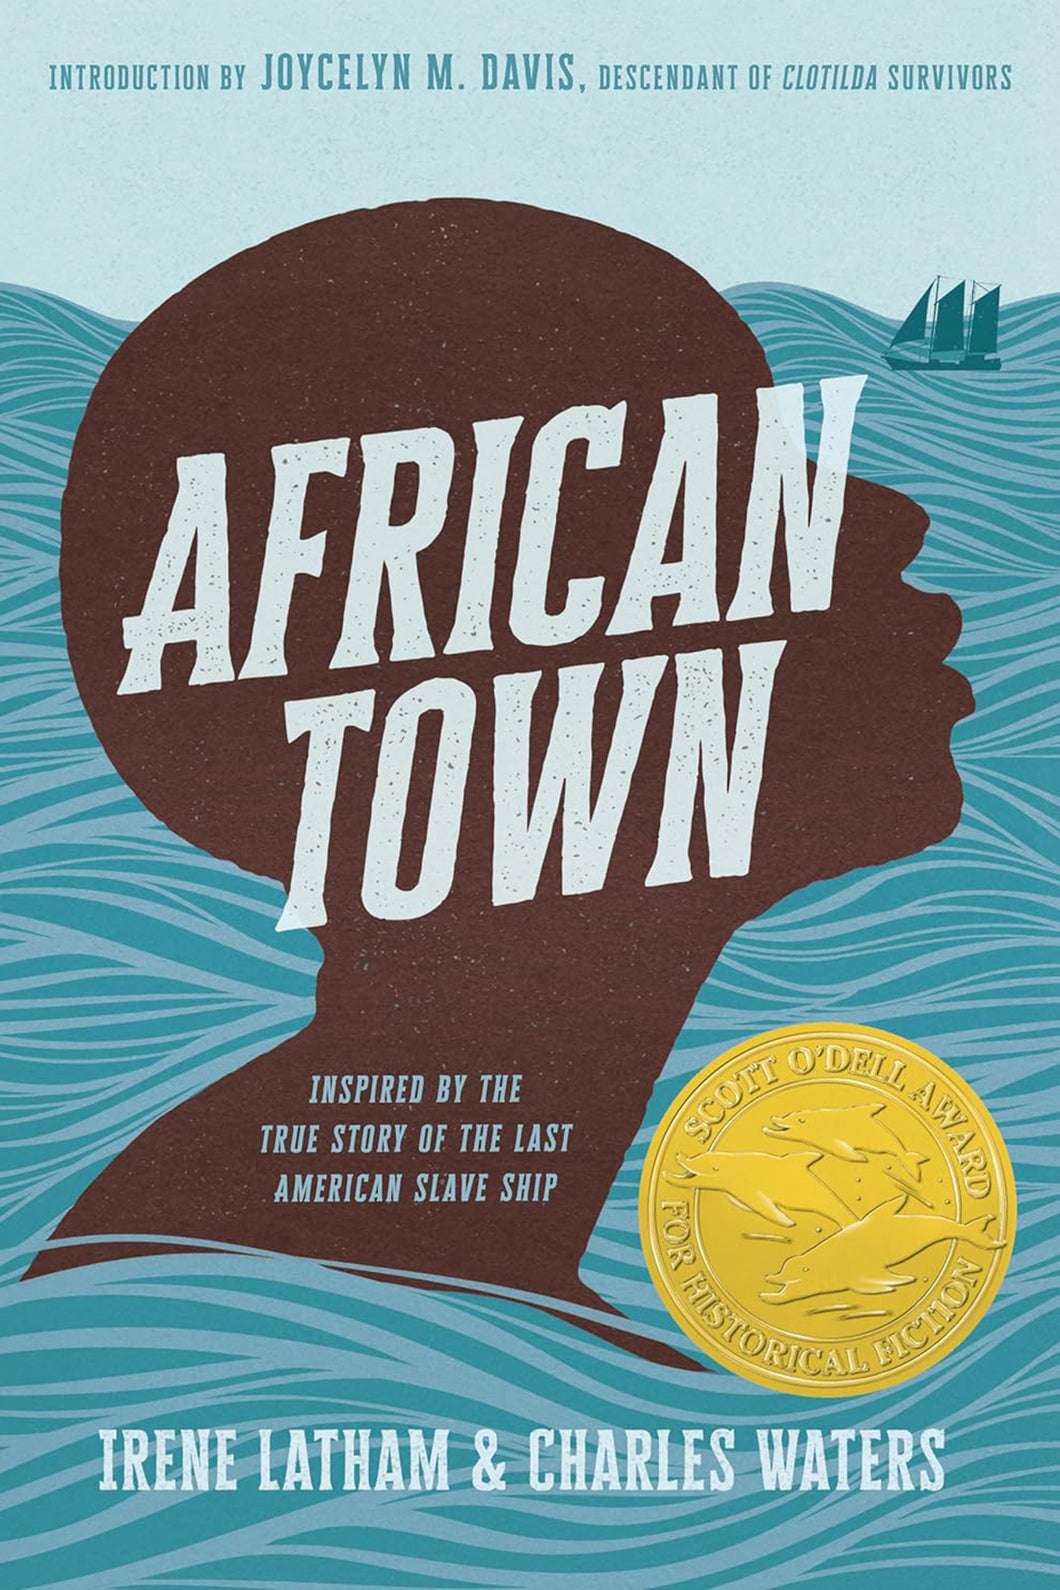 African Town by Charles Waters & Irene Latham / Hardcover or Paperback - NEW BOOK